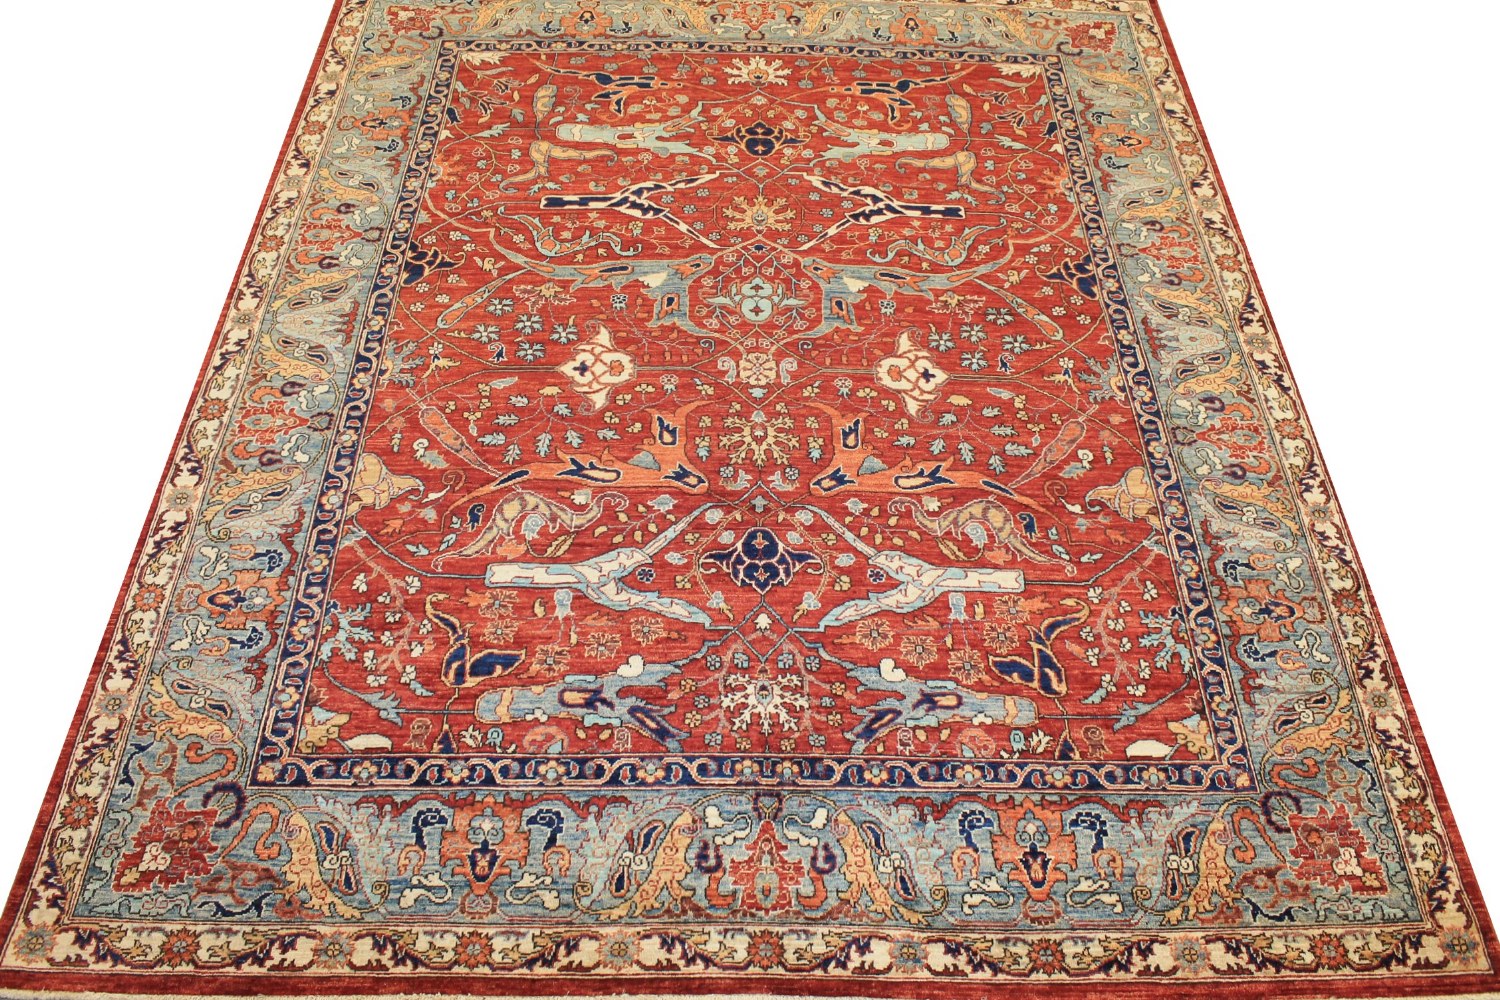 8x10 Aryana & Antique Revivals Hand Knotted Wool Area Rug - MR027261